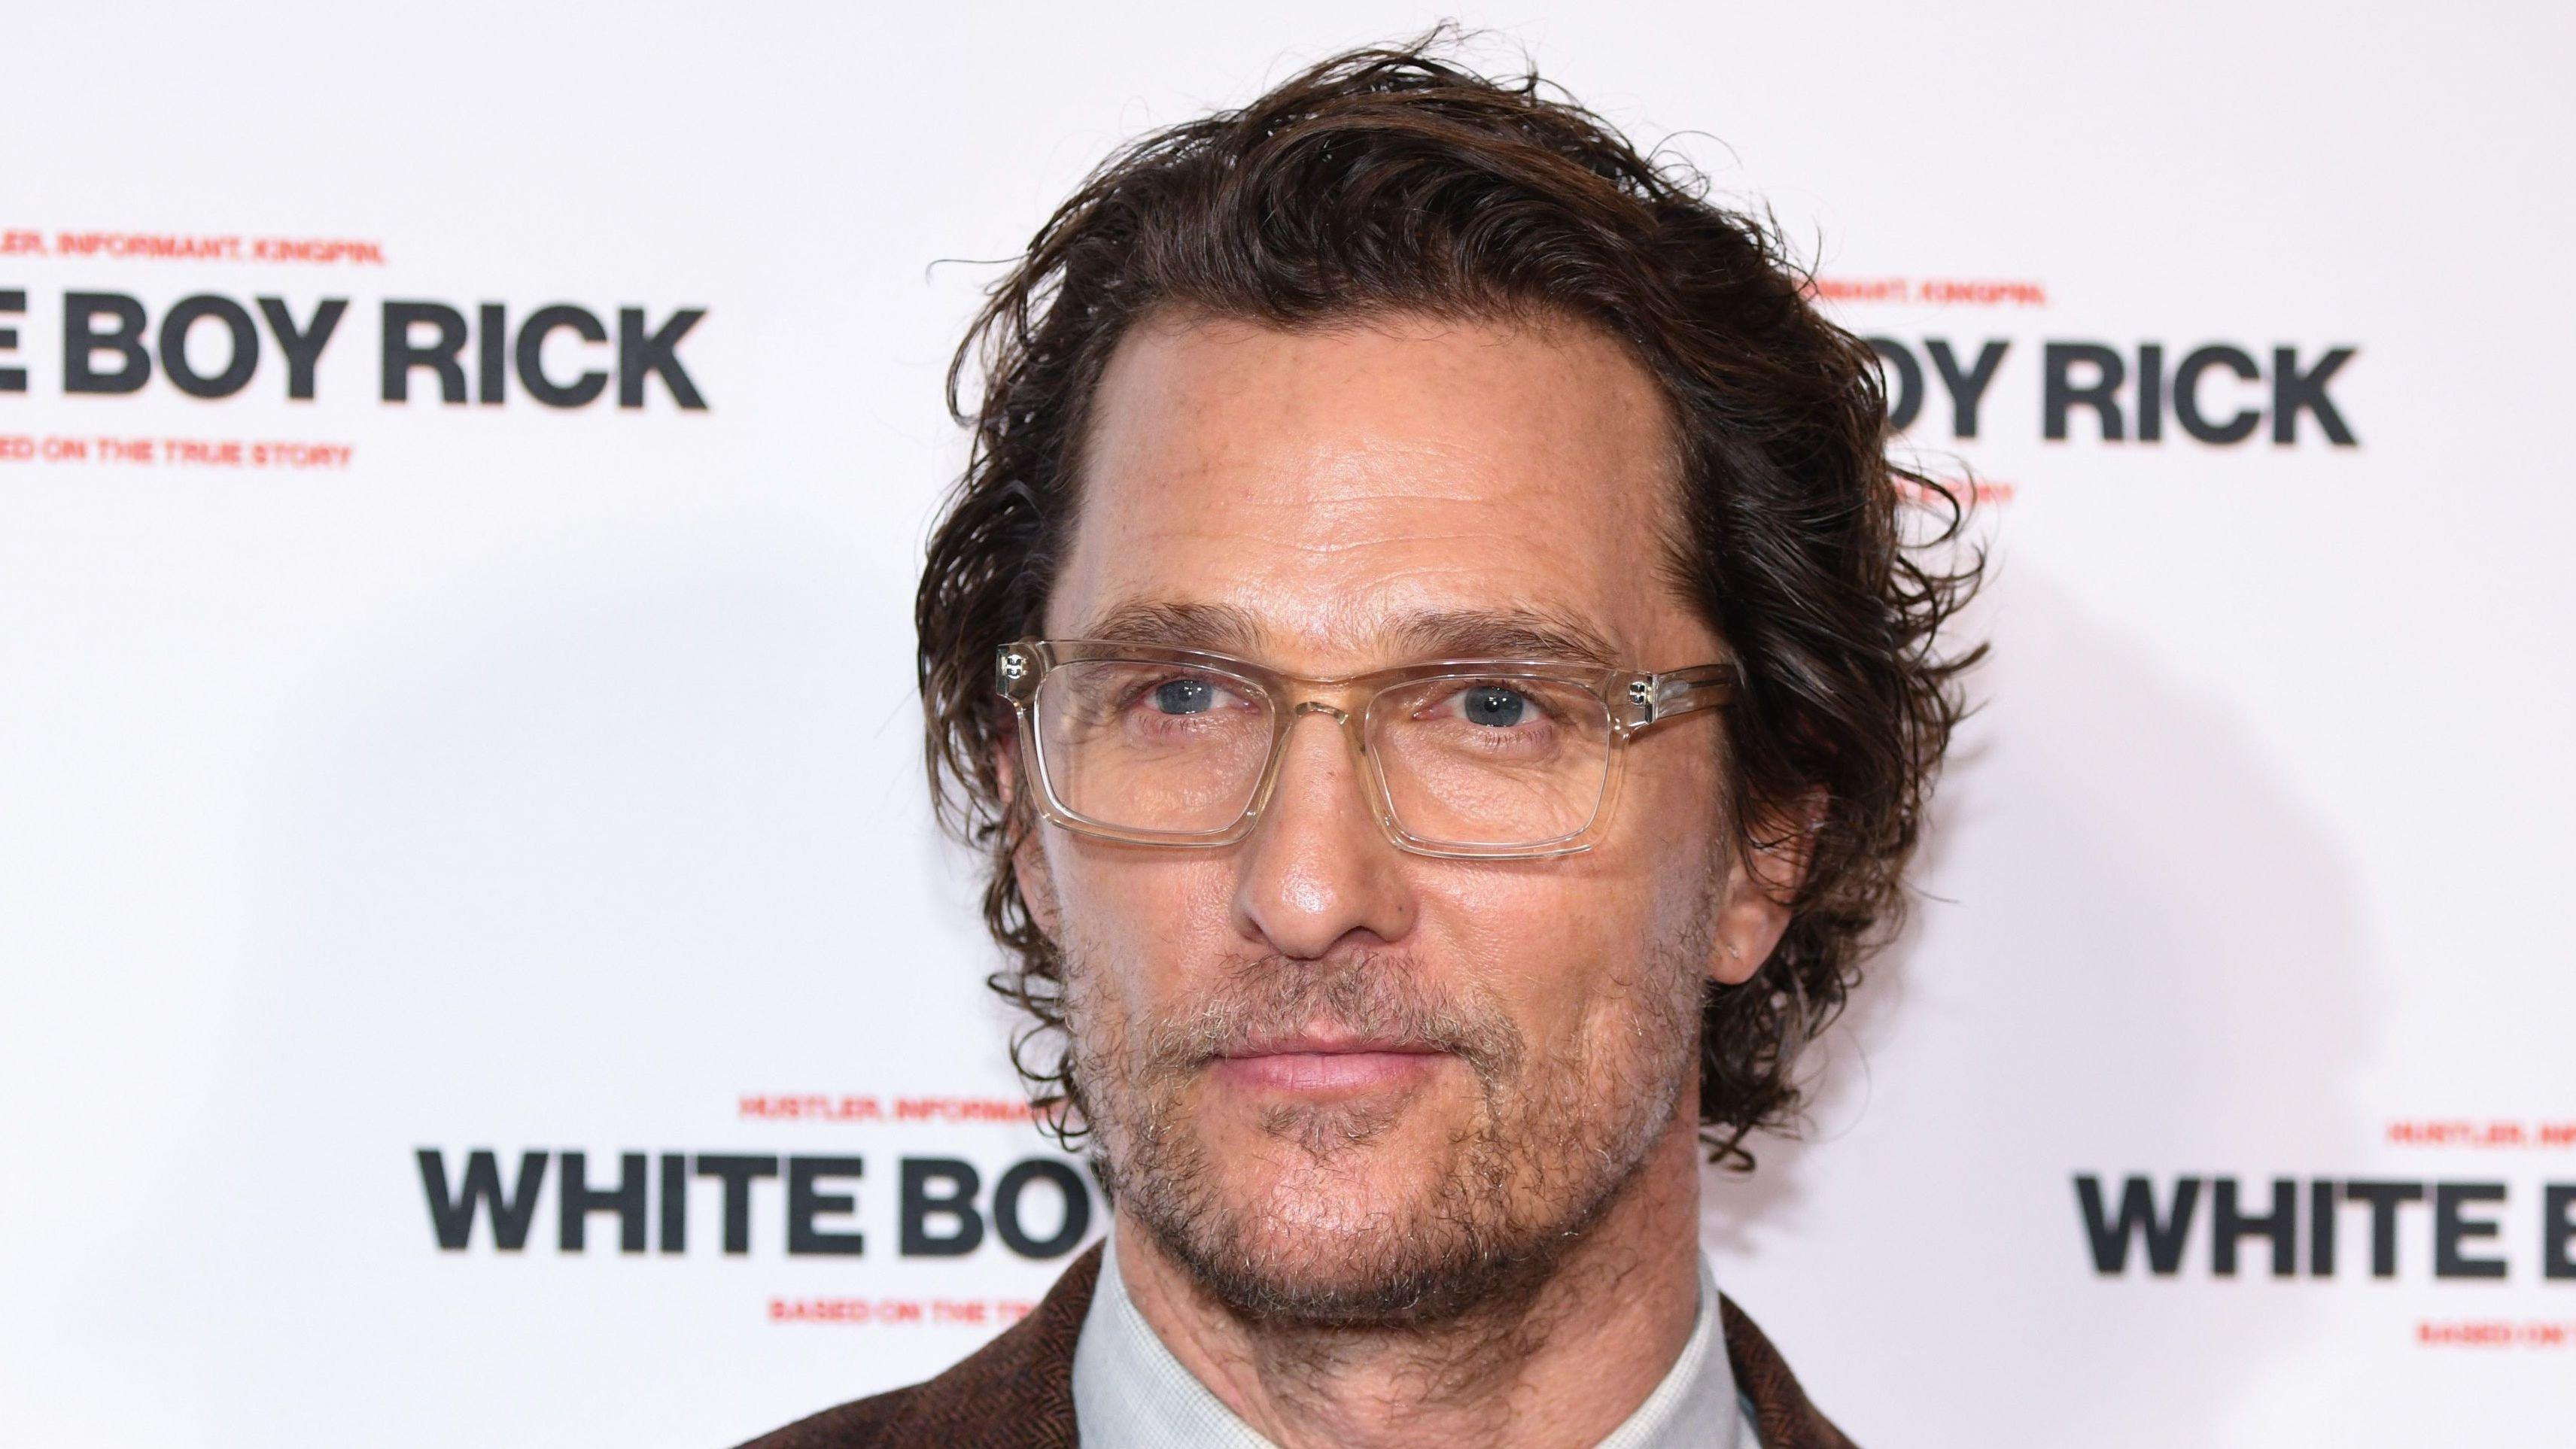 Matthew McConaughey in brown suit and glasses